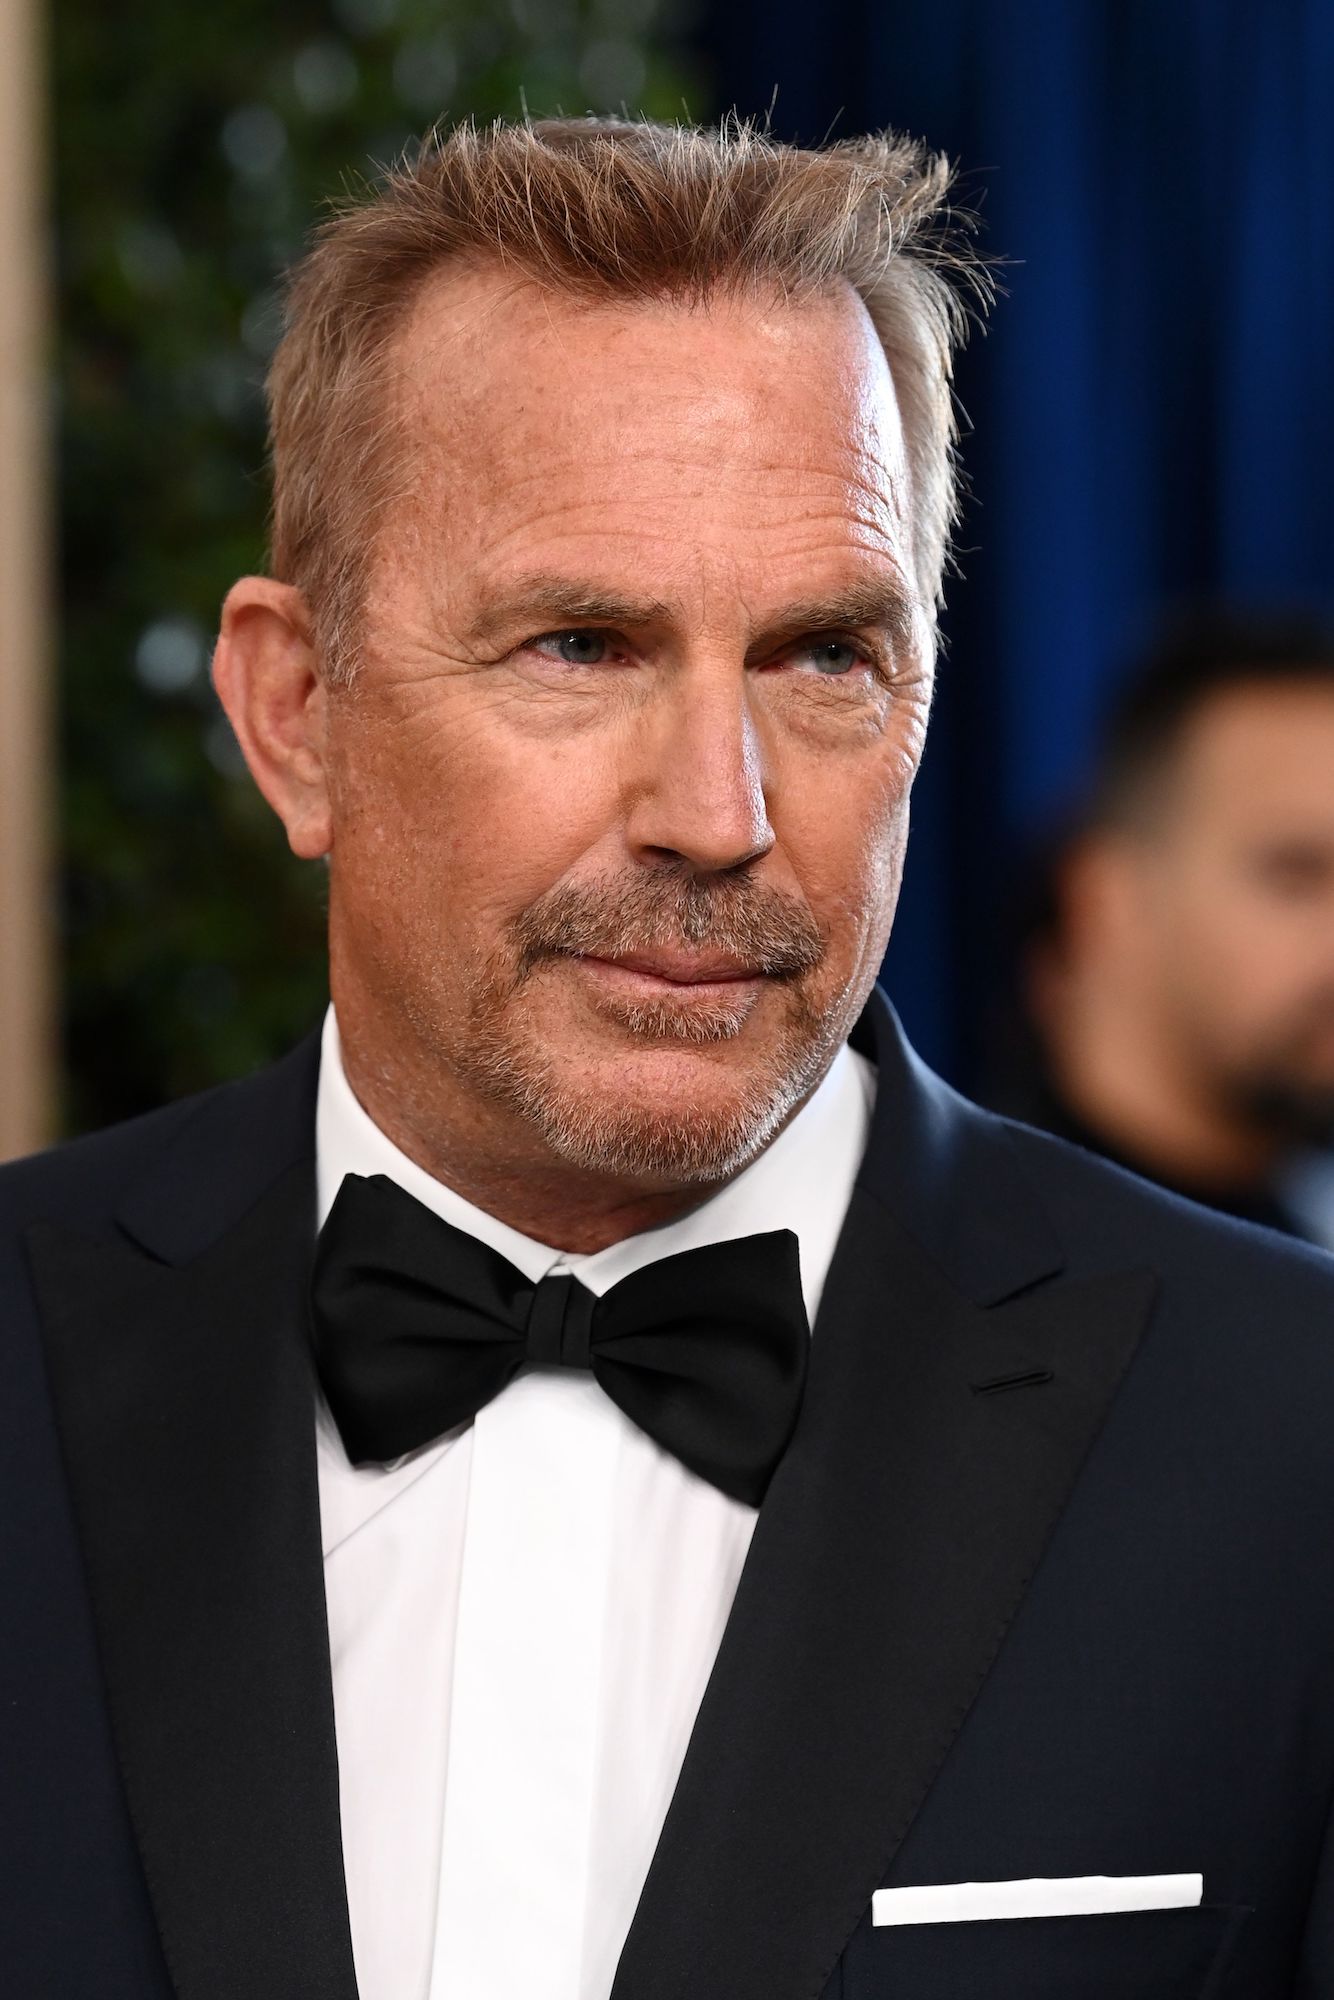 The Kevin Costner Hair Transplant Controversy: A Closer Look